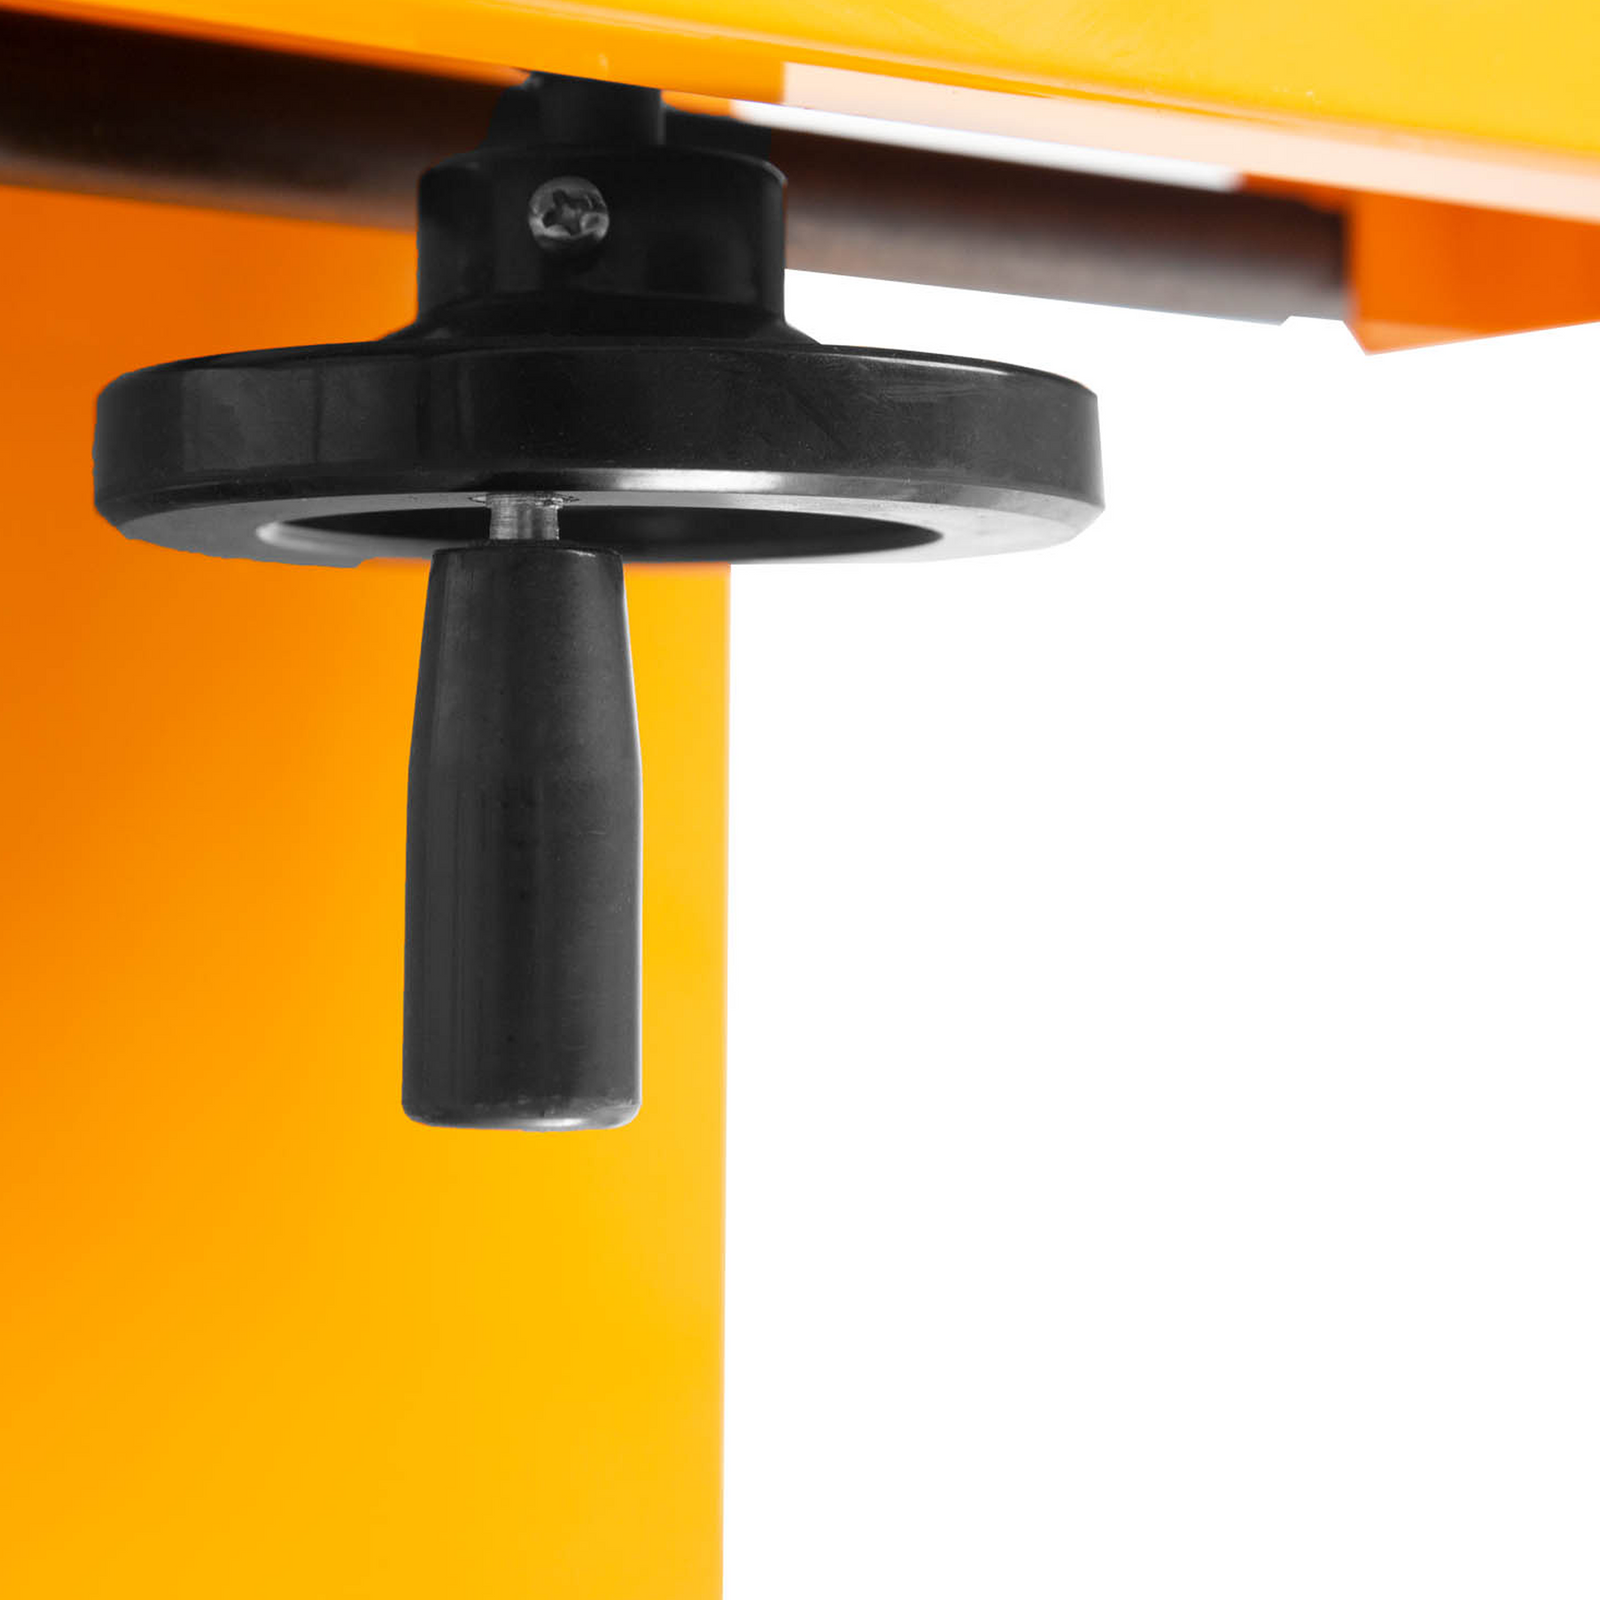 close up of black handle used to adjust the height to a specific product on yellow continuous JORES TECHNOLOGIES® band sealer